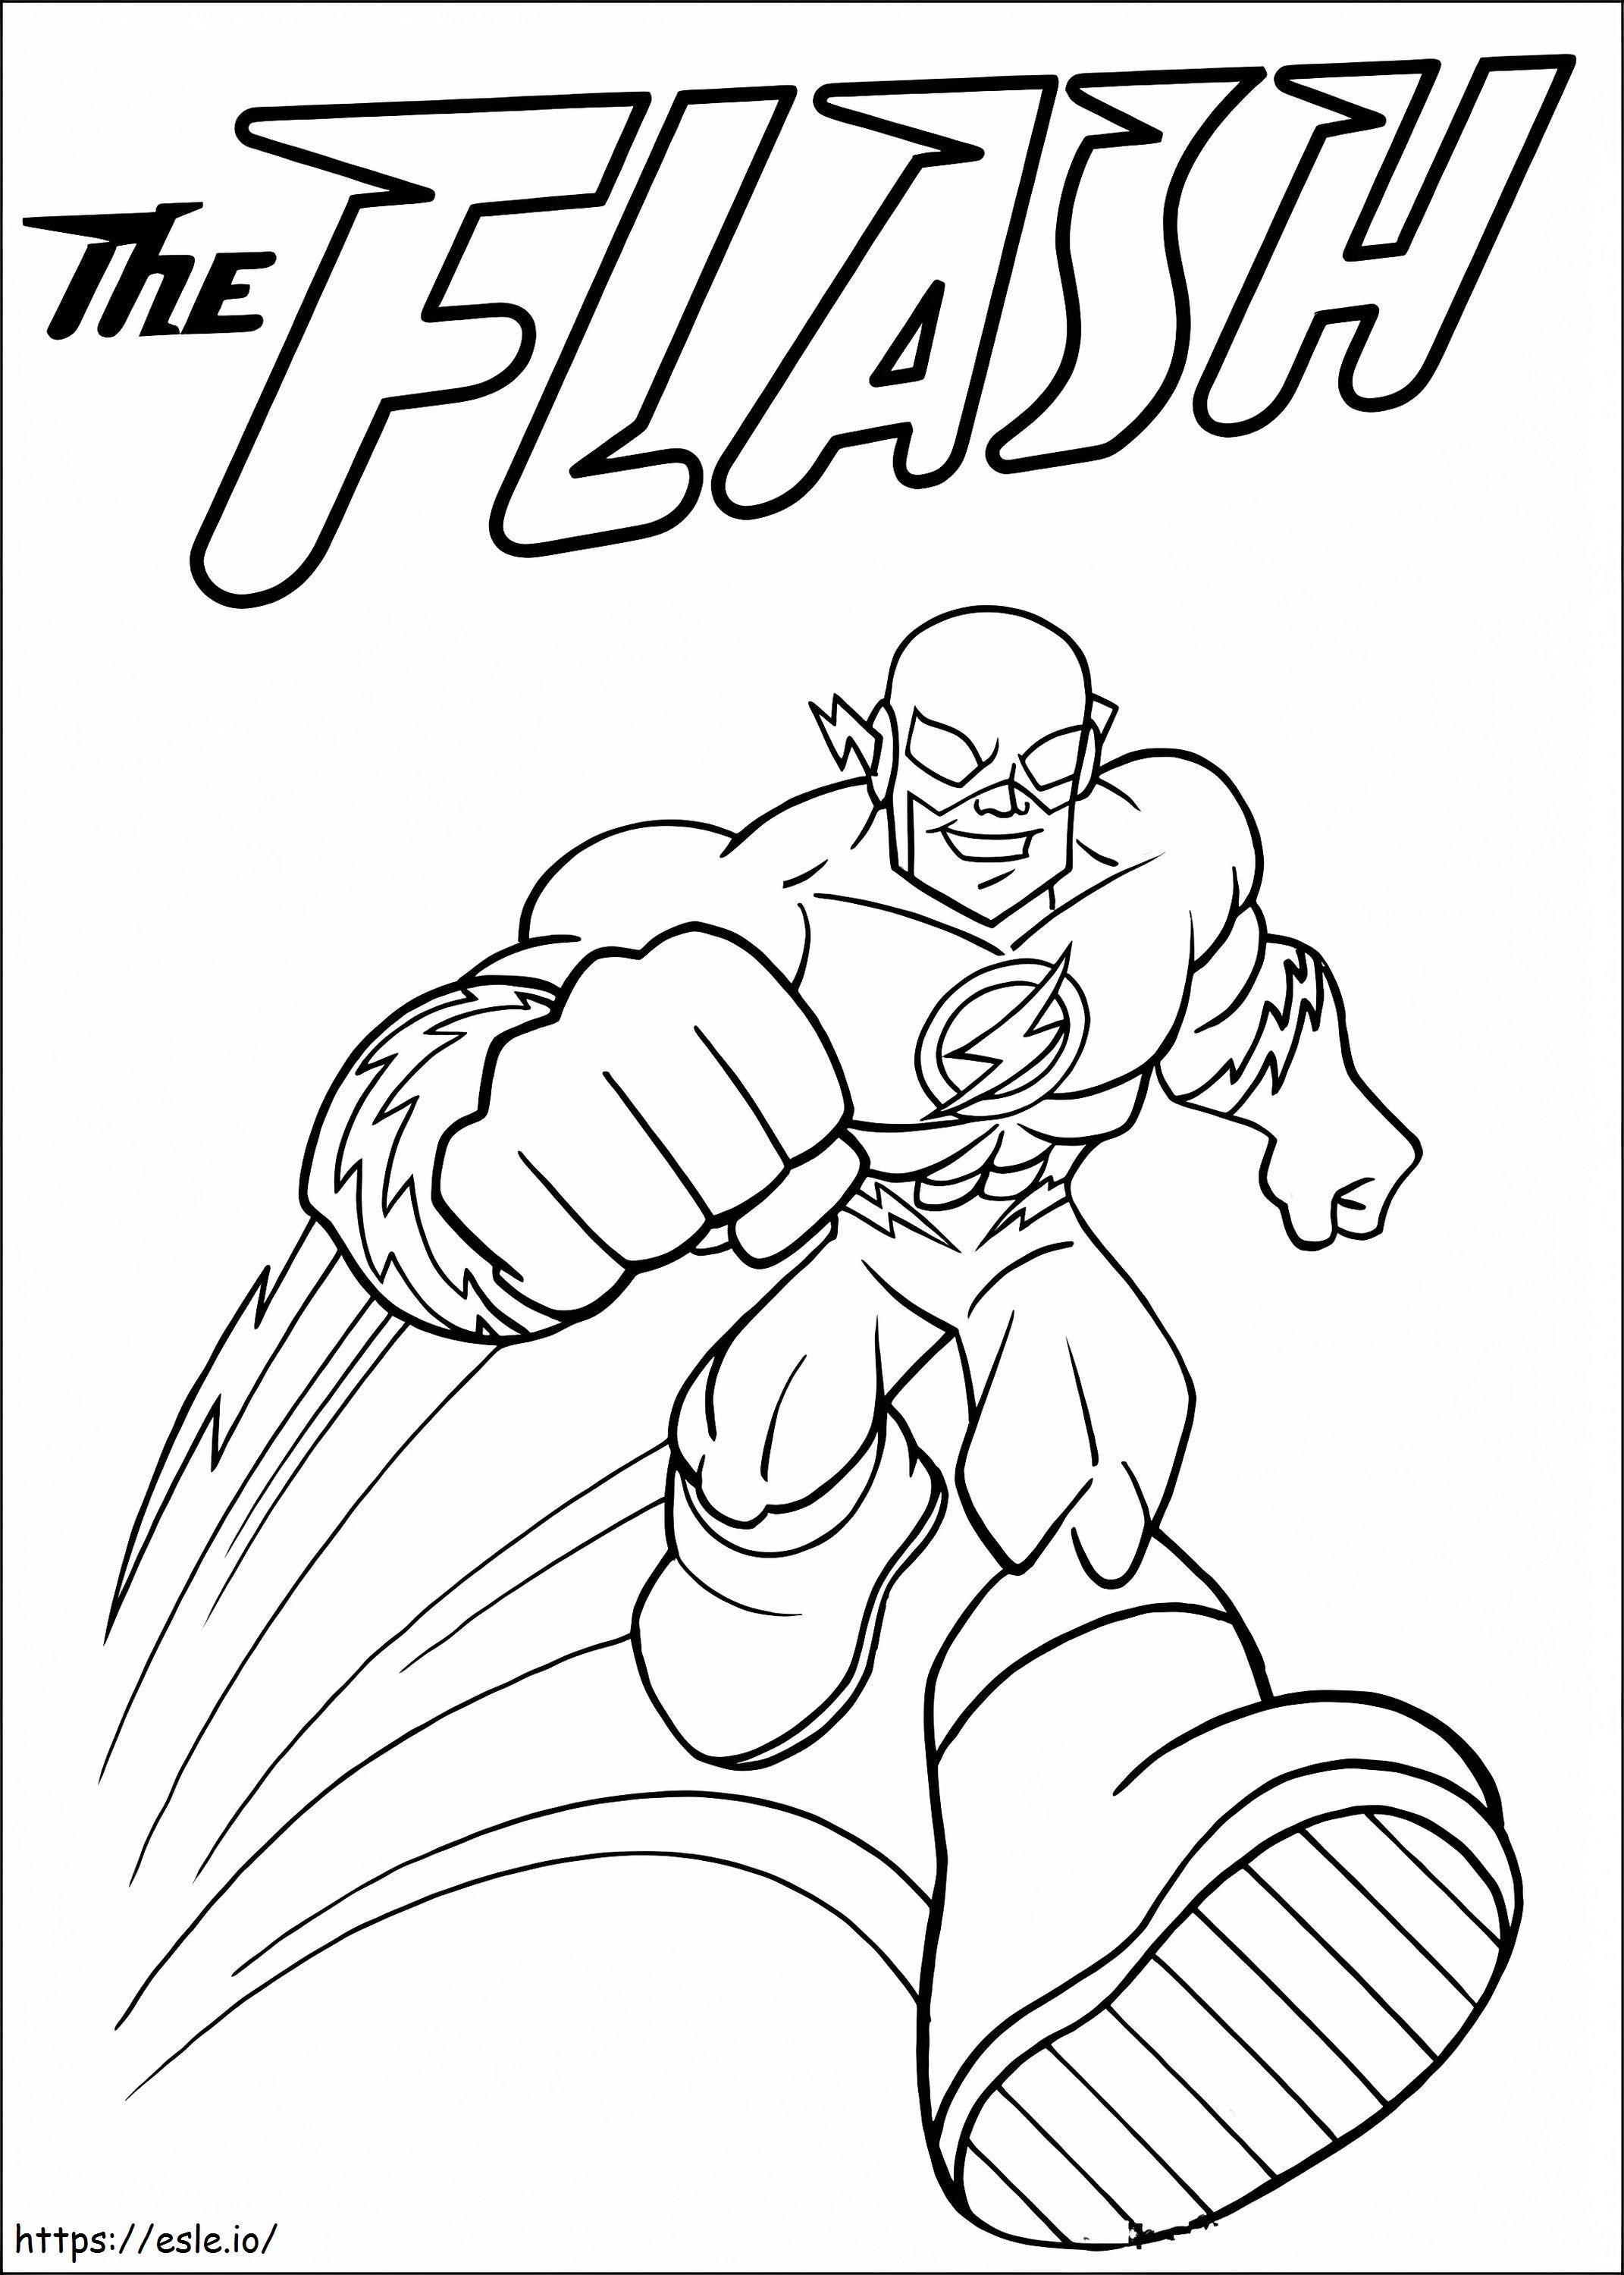 The Flash From Super Friends coloring page